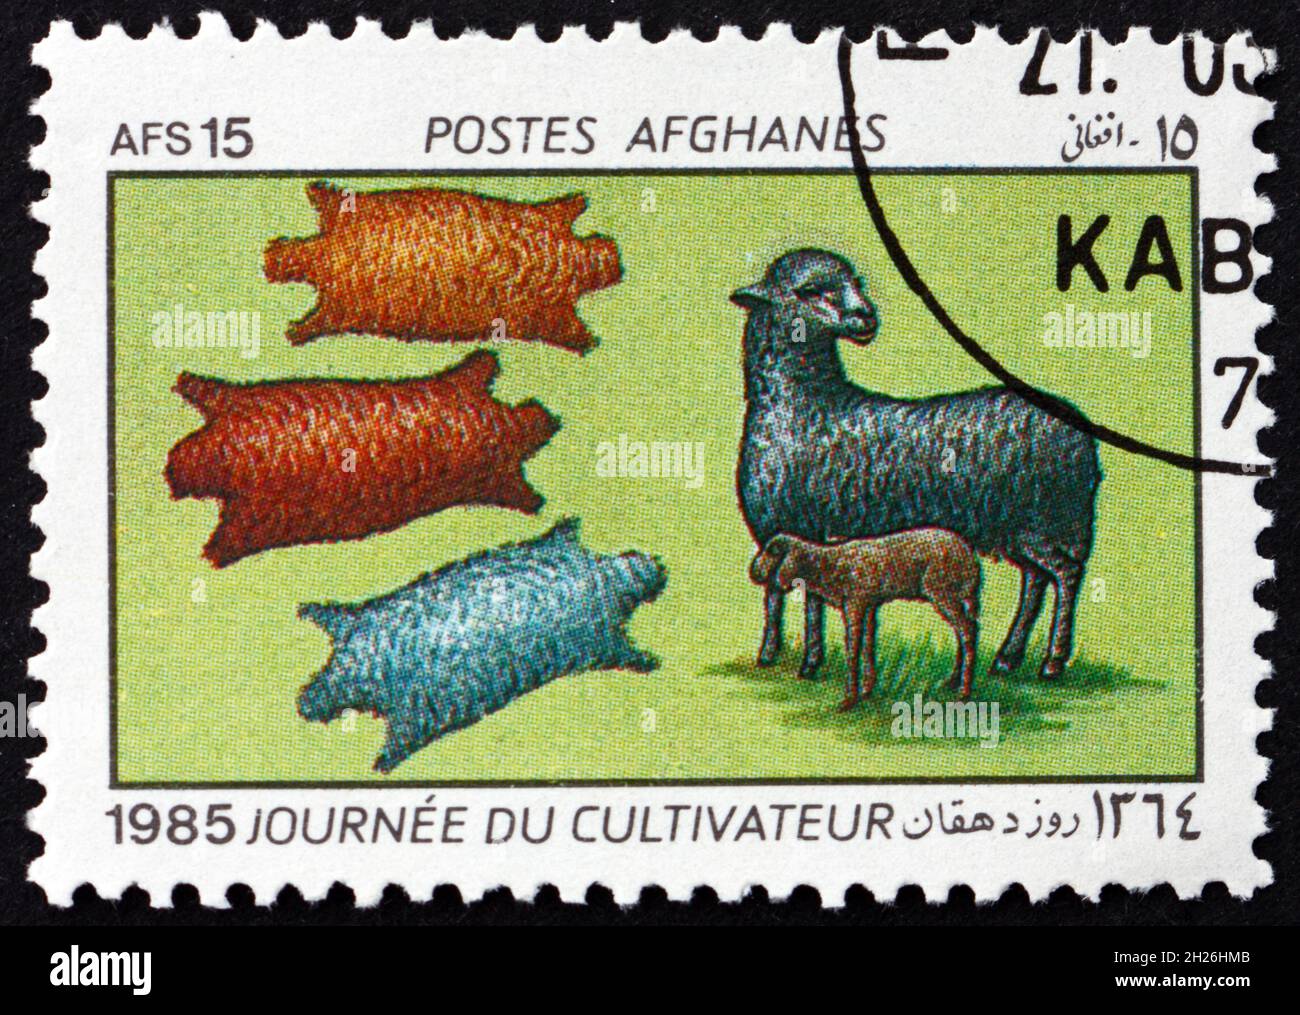 AFGHANISTAN - CIRCA 1985: a stamp printed in Afghanistan shows karakul sheep (ovis ammon aries) with lamb, furs, farmer’s day, circa 1985 Stock Photo